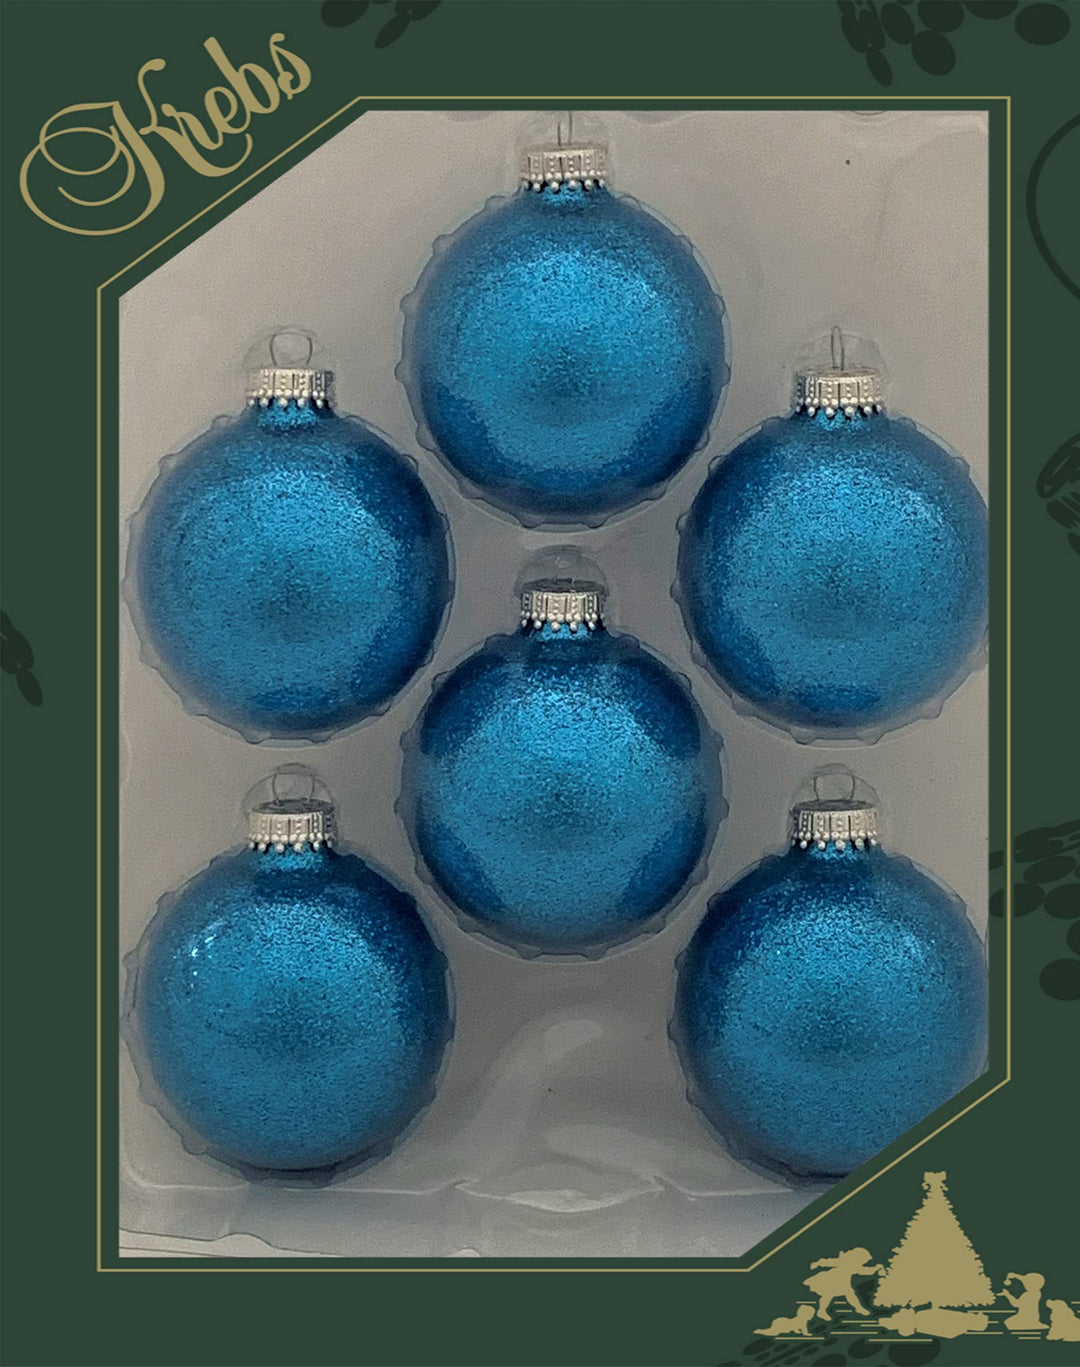 Glass Christmas Tree Ornaments - 67mm / 2.63" [6 Pieces] Designer Balls from Christmas By Krebs Seamless Hanging Holiday Decor (Aqua Blue Sparkle)